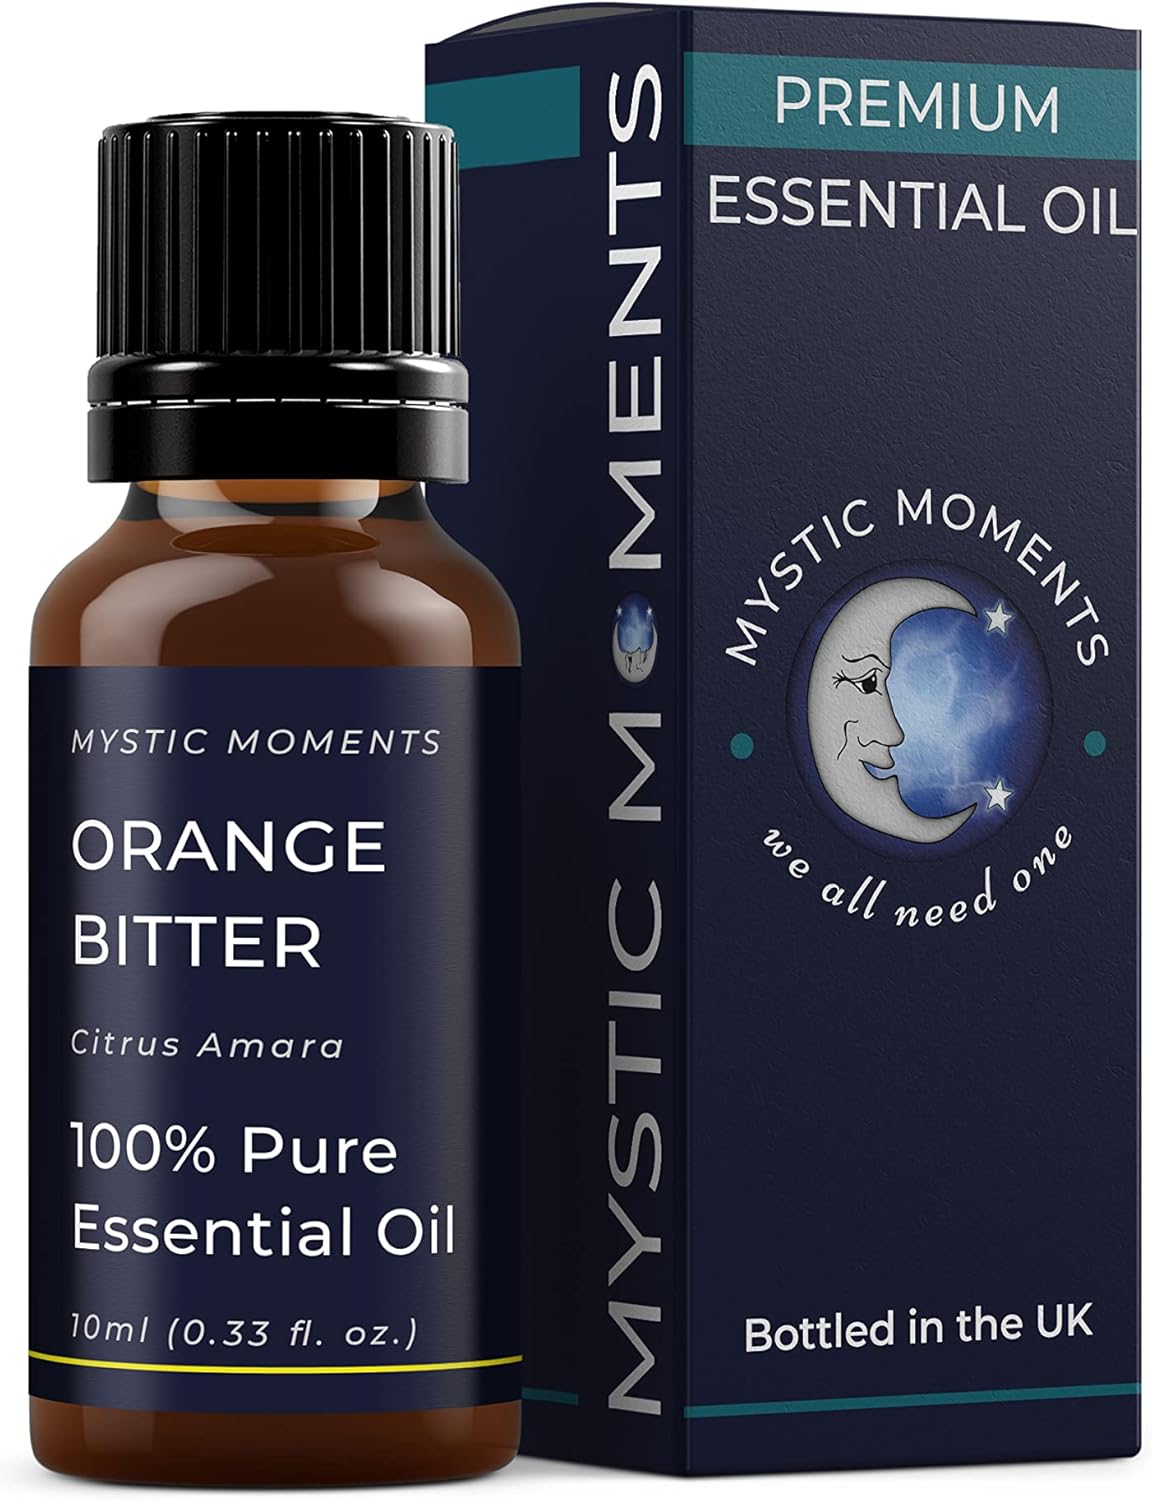 Mystic Moments | Orange Bitter Essential Oil 10ml - Pure & Natural oil for Diffusers, Aromatherapy & Massage Blends Vegan GMO Free